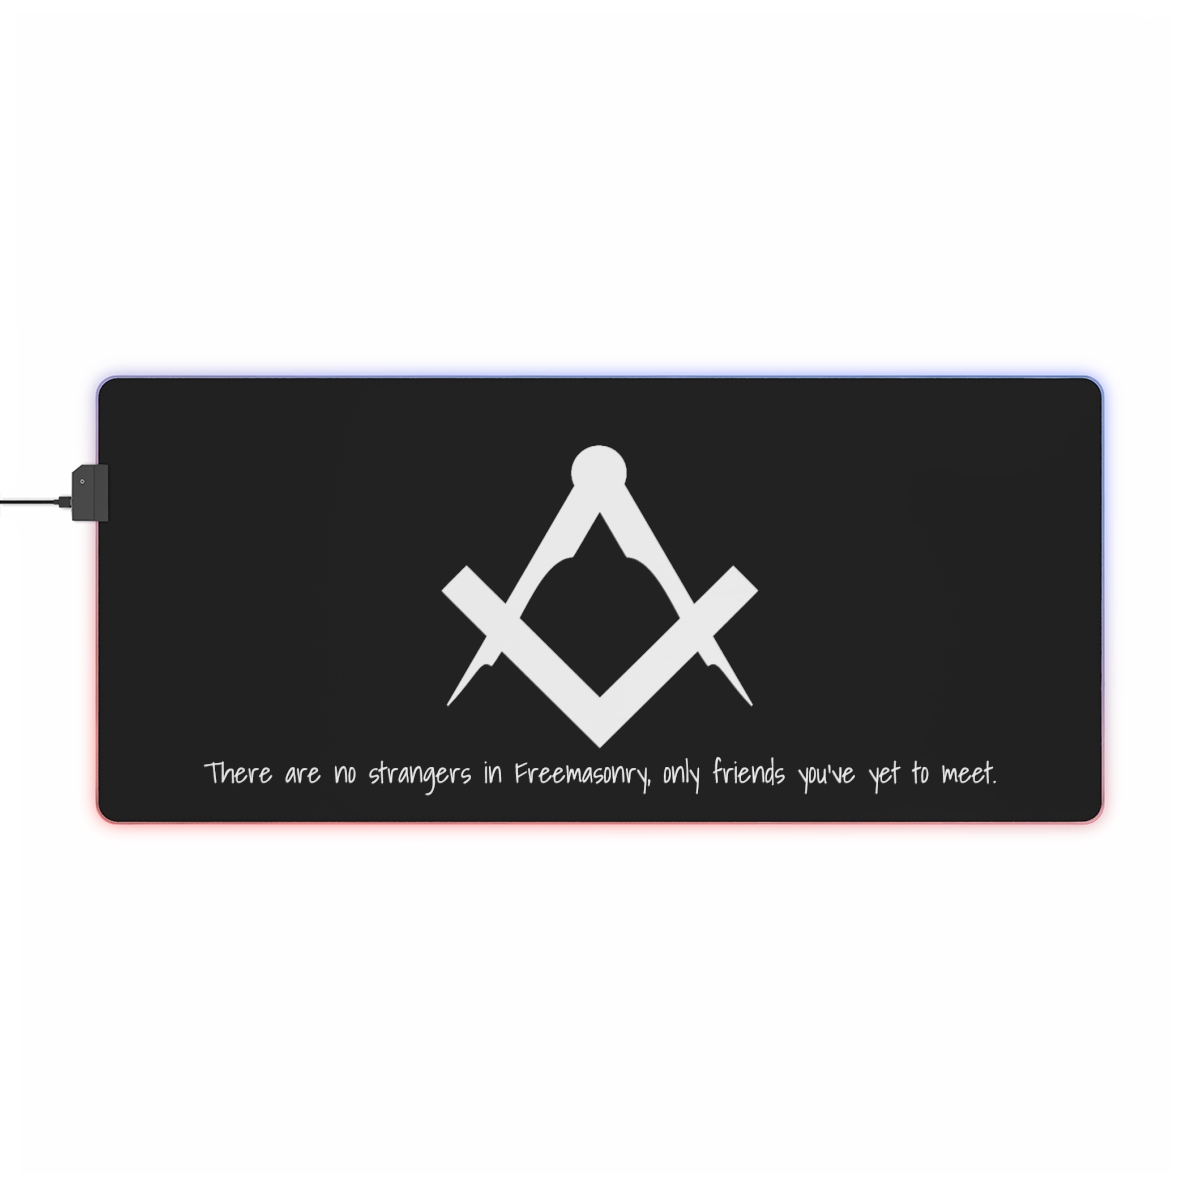 Masonic Square and Compass LED Gaming Mouse Pad